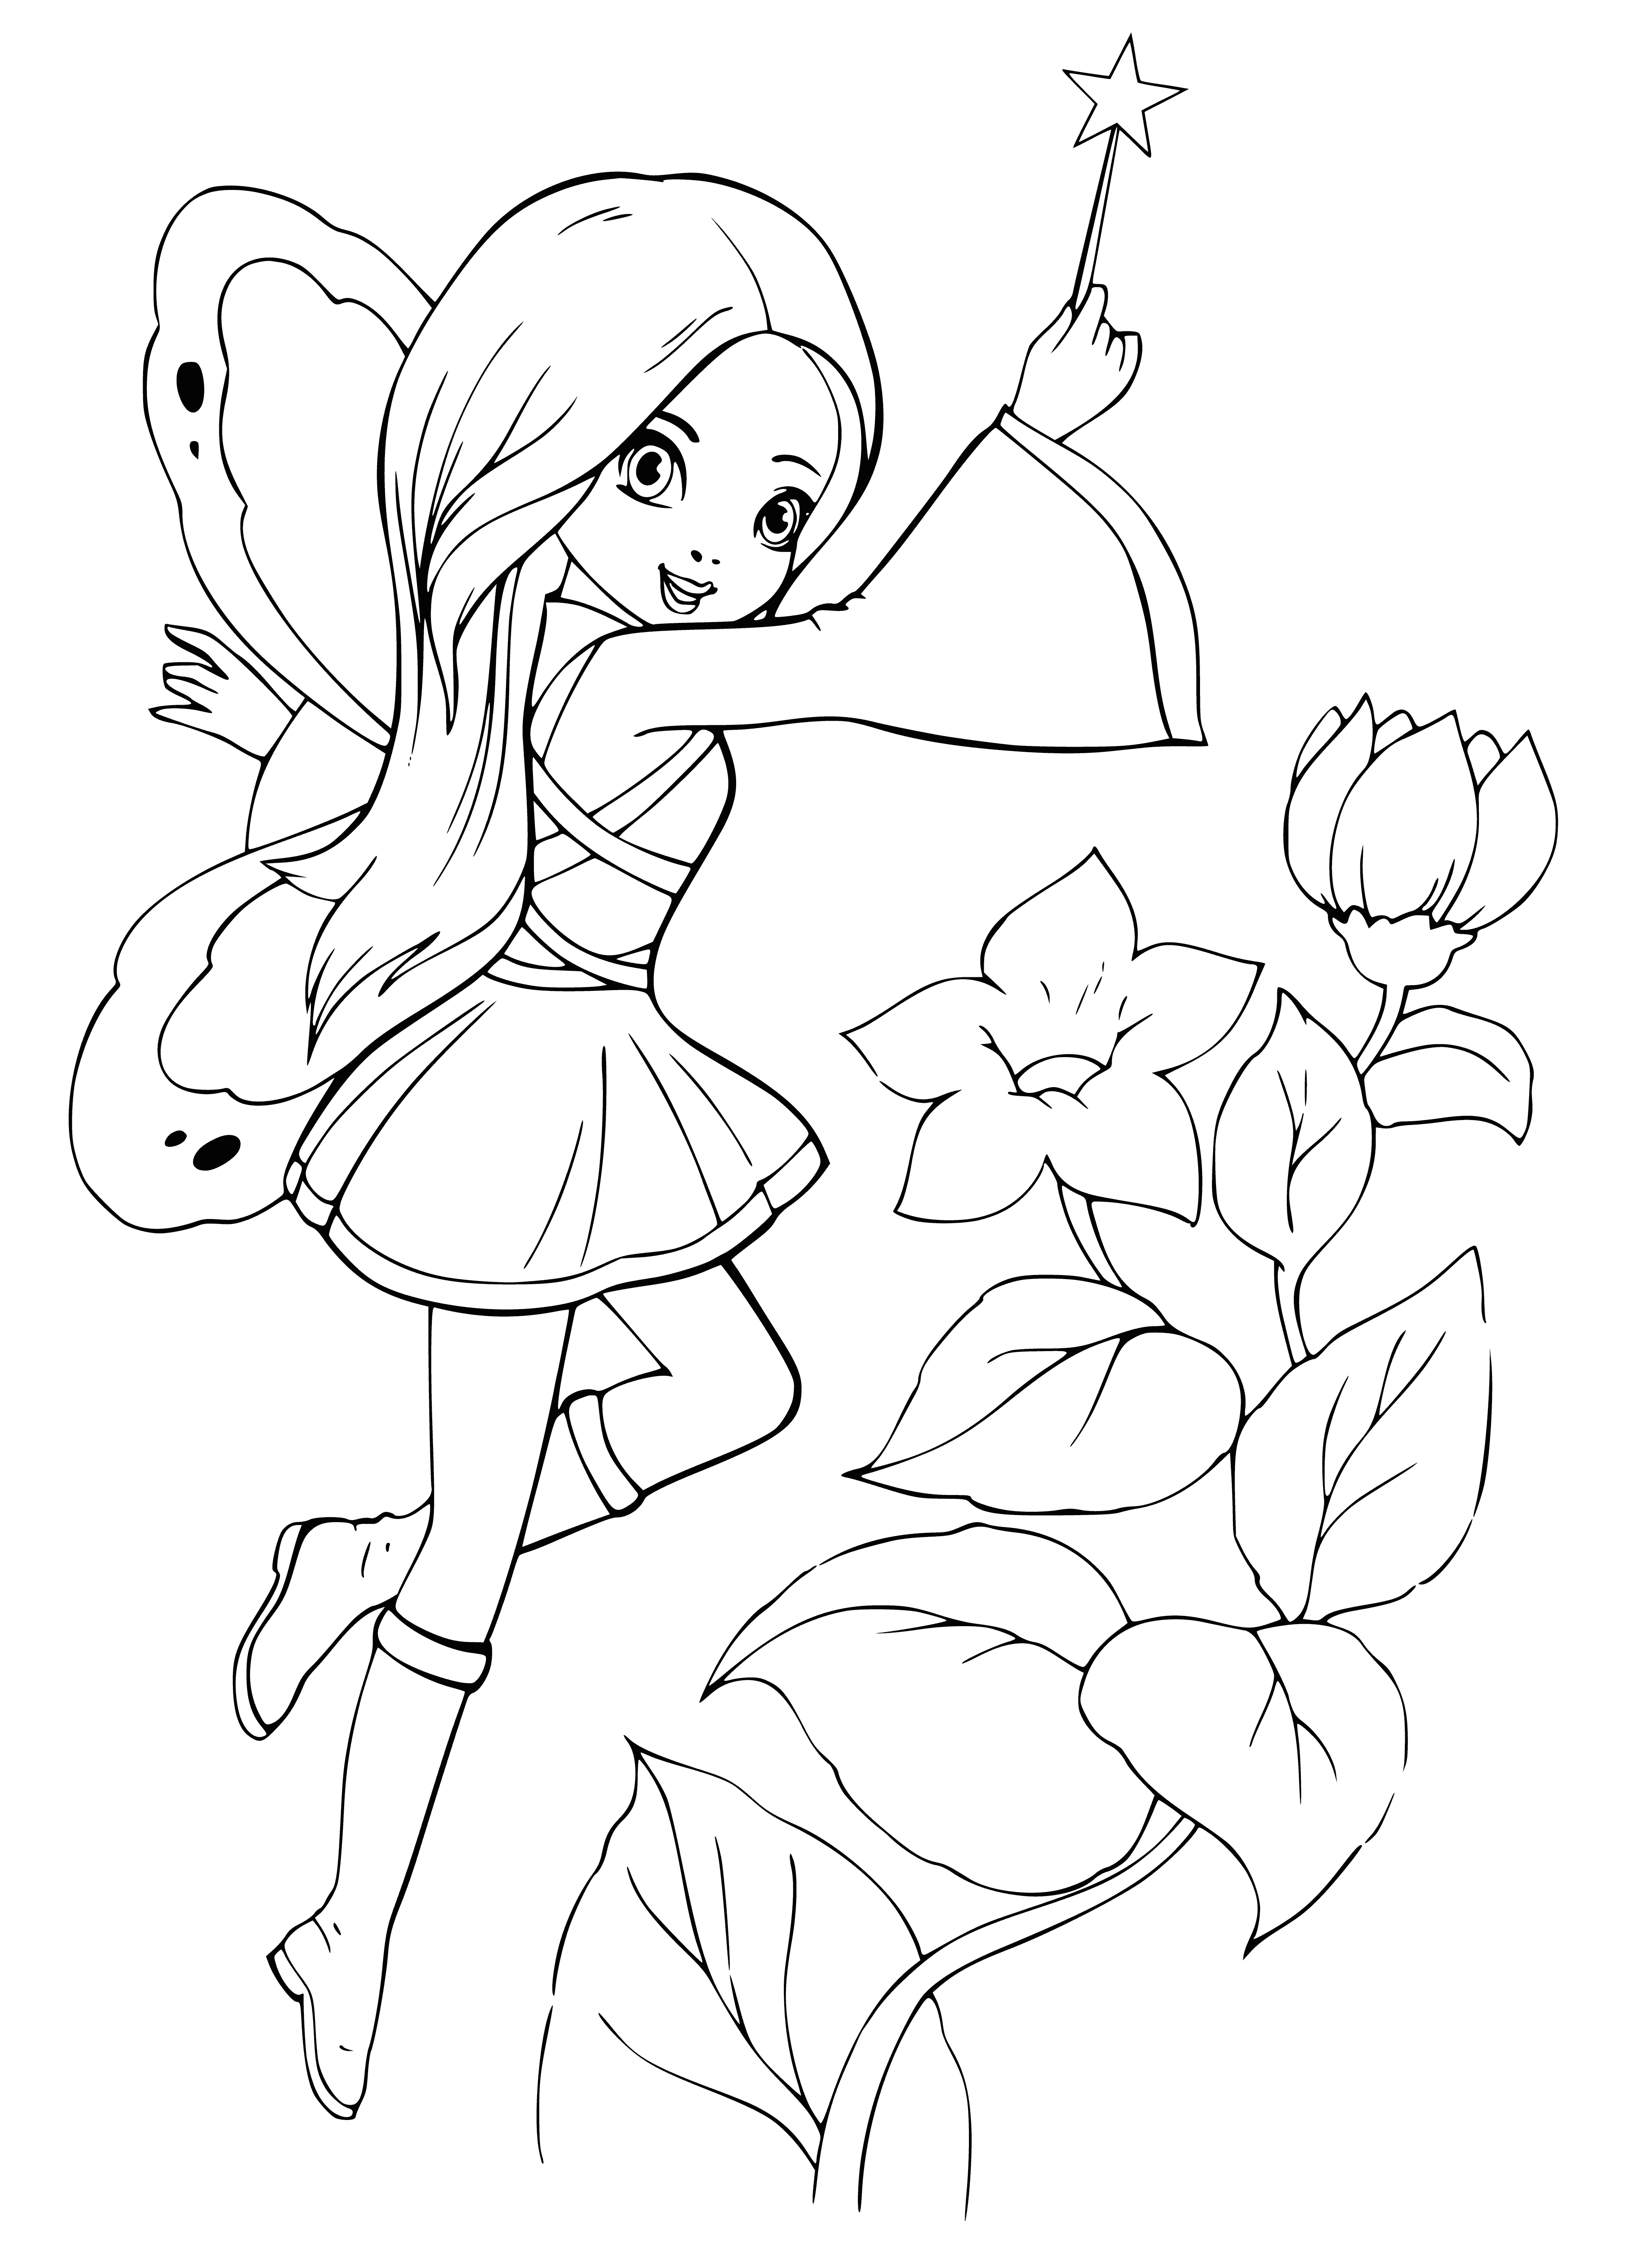 coloring page: Fairy with wings and wand flying in the air, bringing magical surprises.